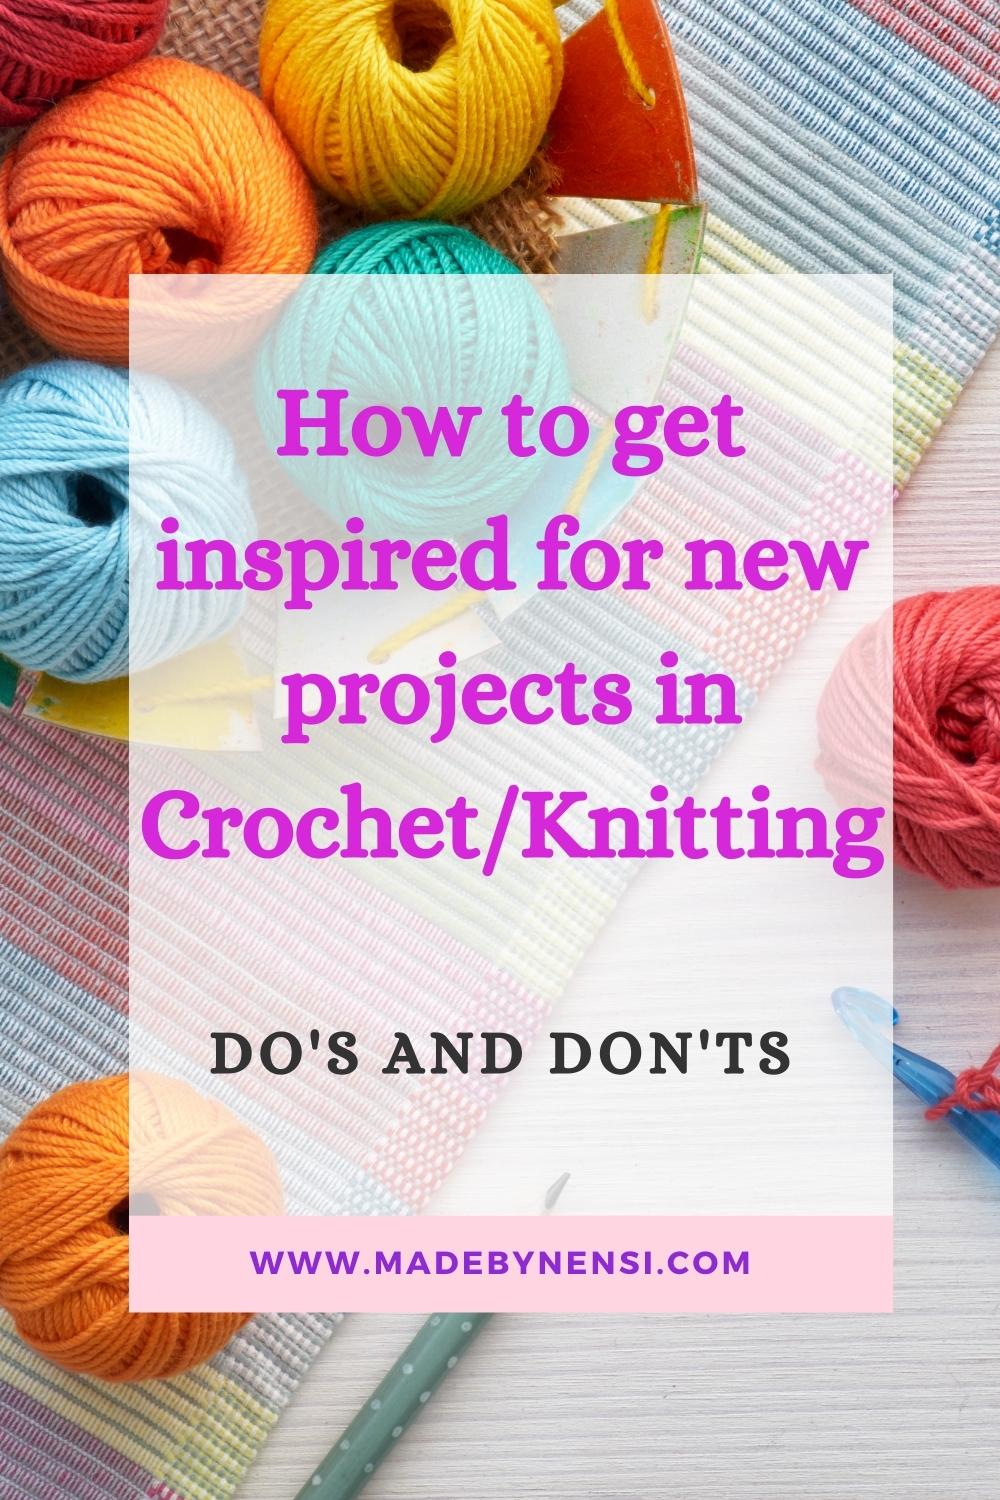 How to get inspired for new projects CrochetKnitting.jpg